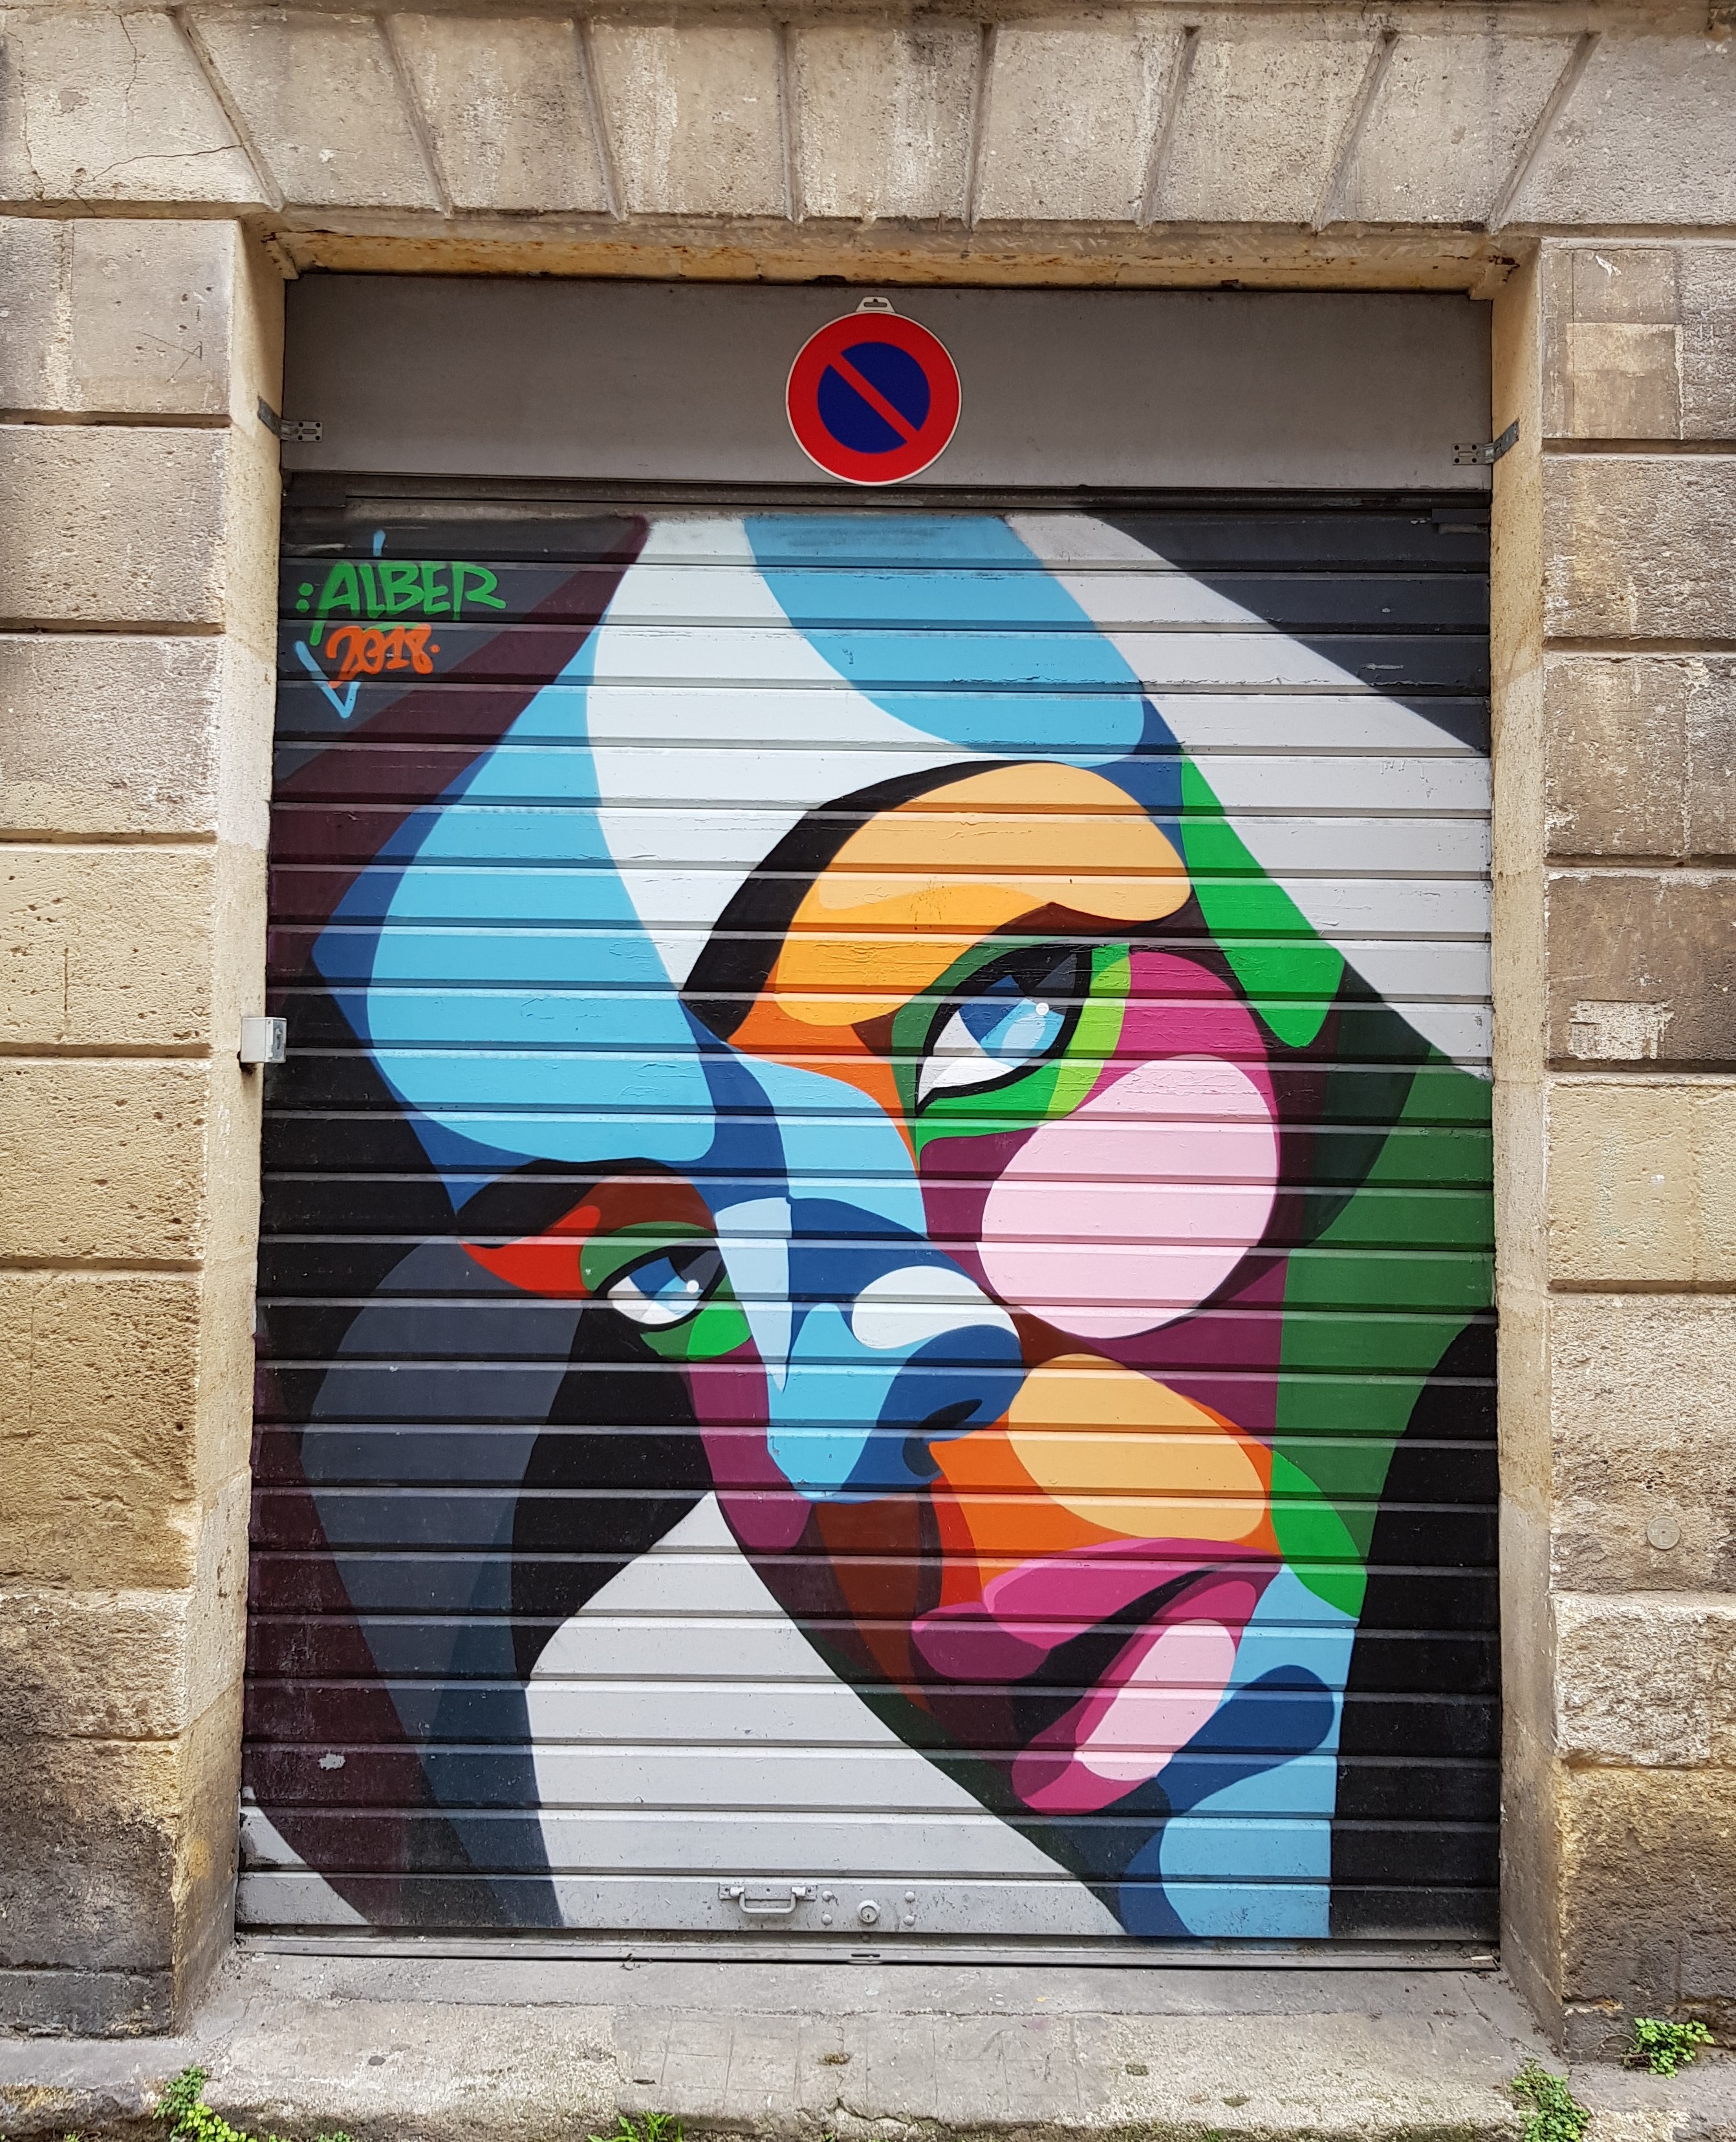 Graffiti 6872  by the artist Alber captured by Mephisroth in Bordeaux France